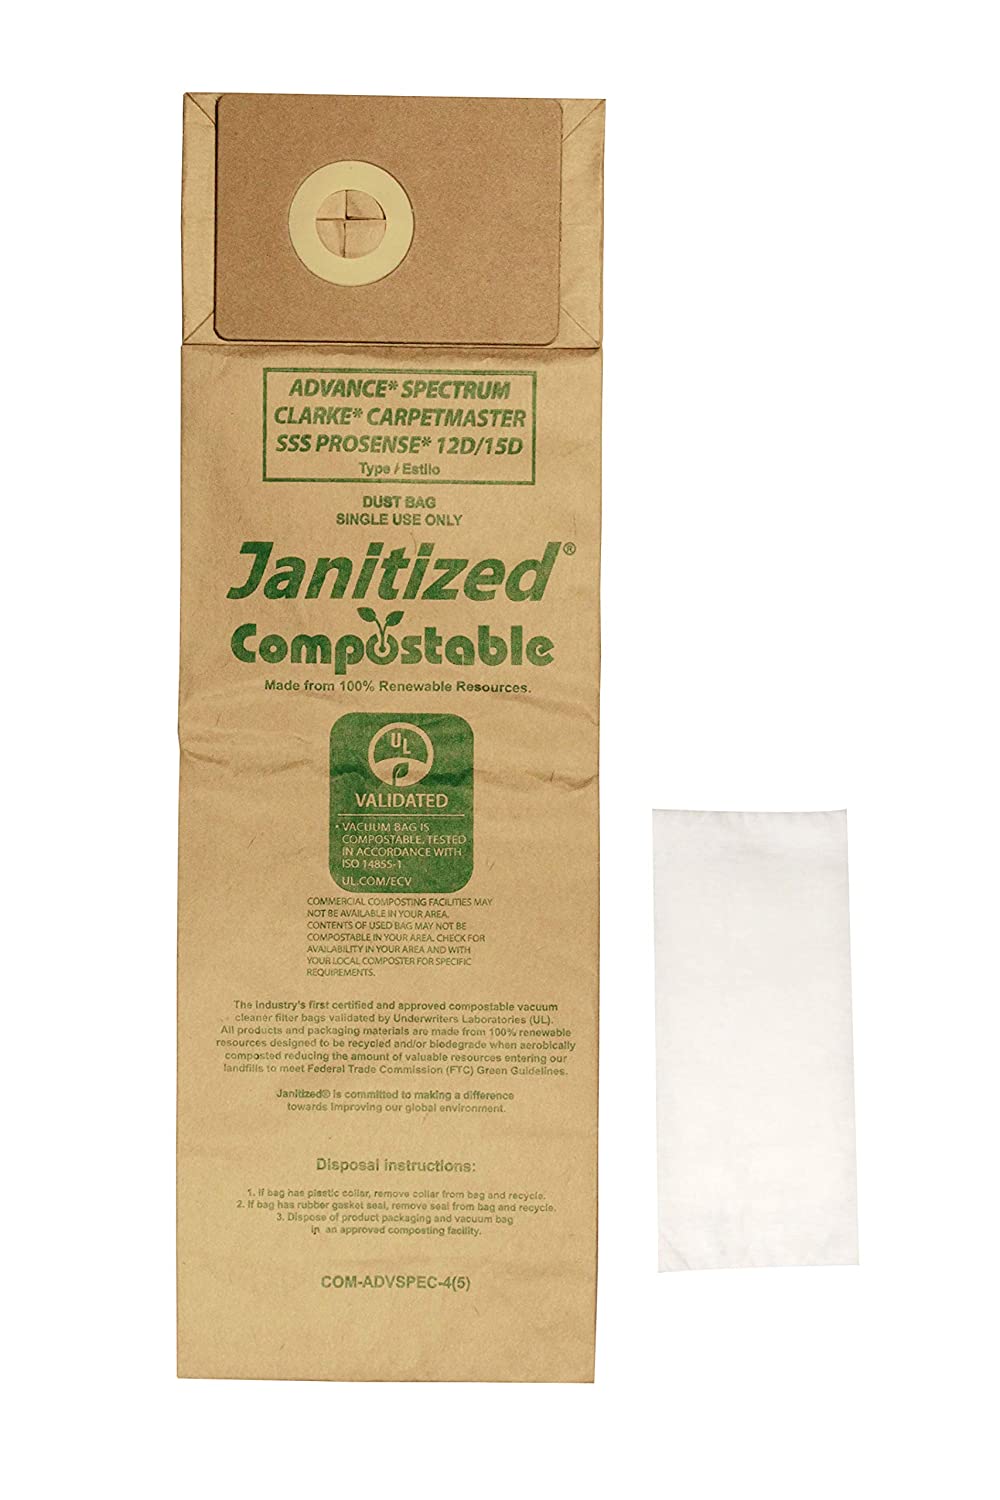 Janitized COM-ADVSPEC-4(5) Compostable Paper Premium Replacement Commercial Vacuum Bag for Advance Spectrum, Clarke CarpetMaster, SSS Prosense Vacuum Cleaners Includes 2 pre-Filters (Pack of 5)